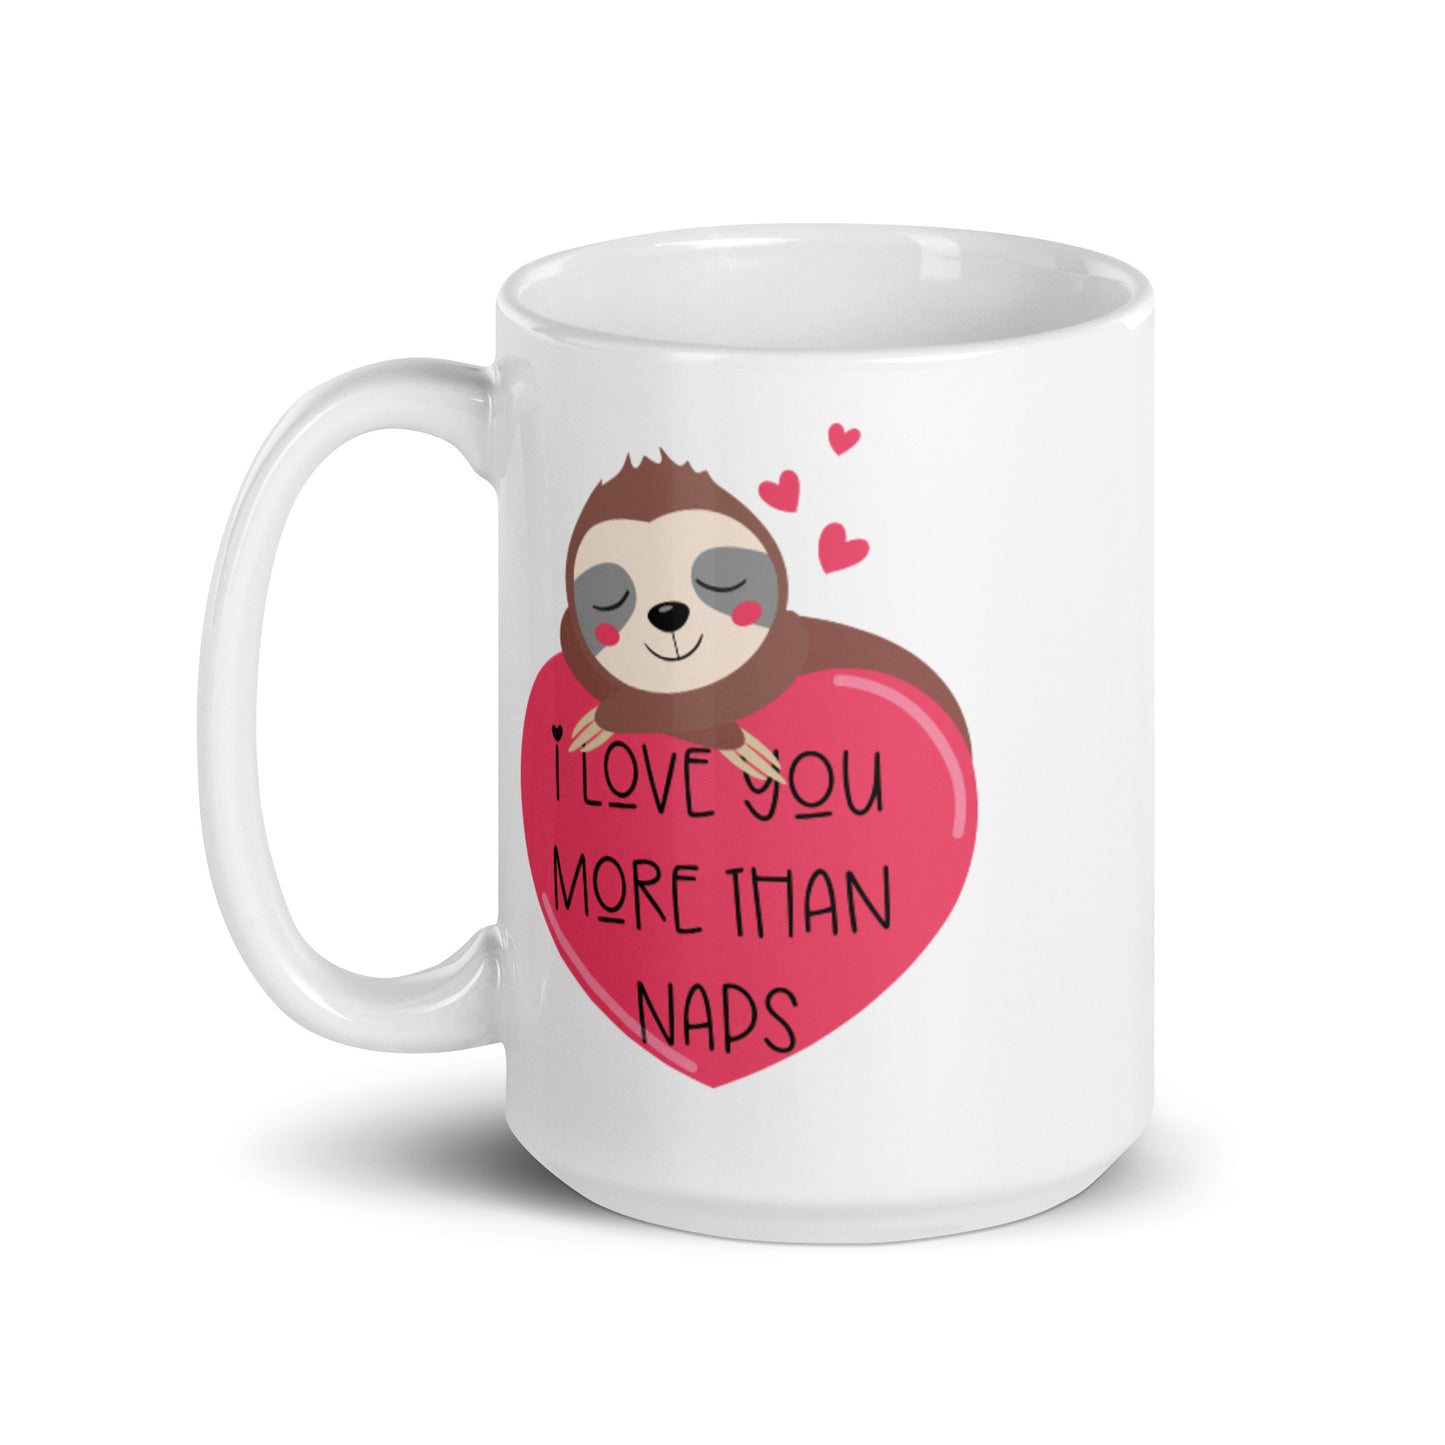 Valentines Day Coffee Mug, I Love You More than Naps Funny Sloth Heart Ceramic Cup Tea Lover Unique Microwave Safe Novelty Cool Gift Starcove Fashion